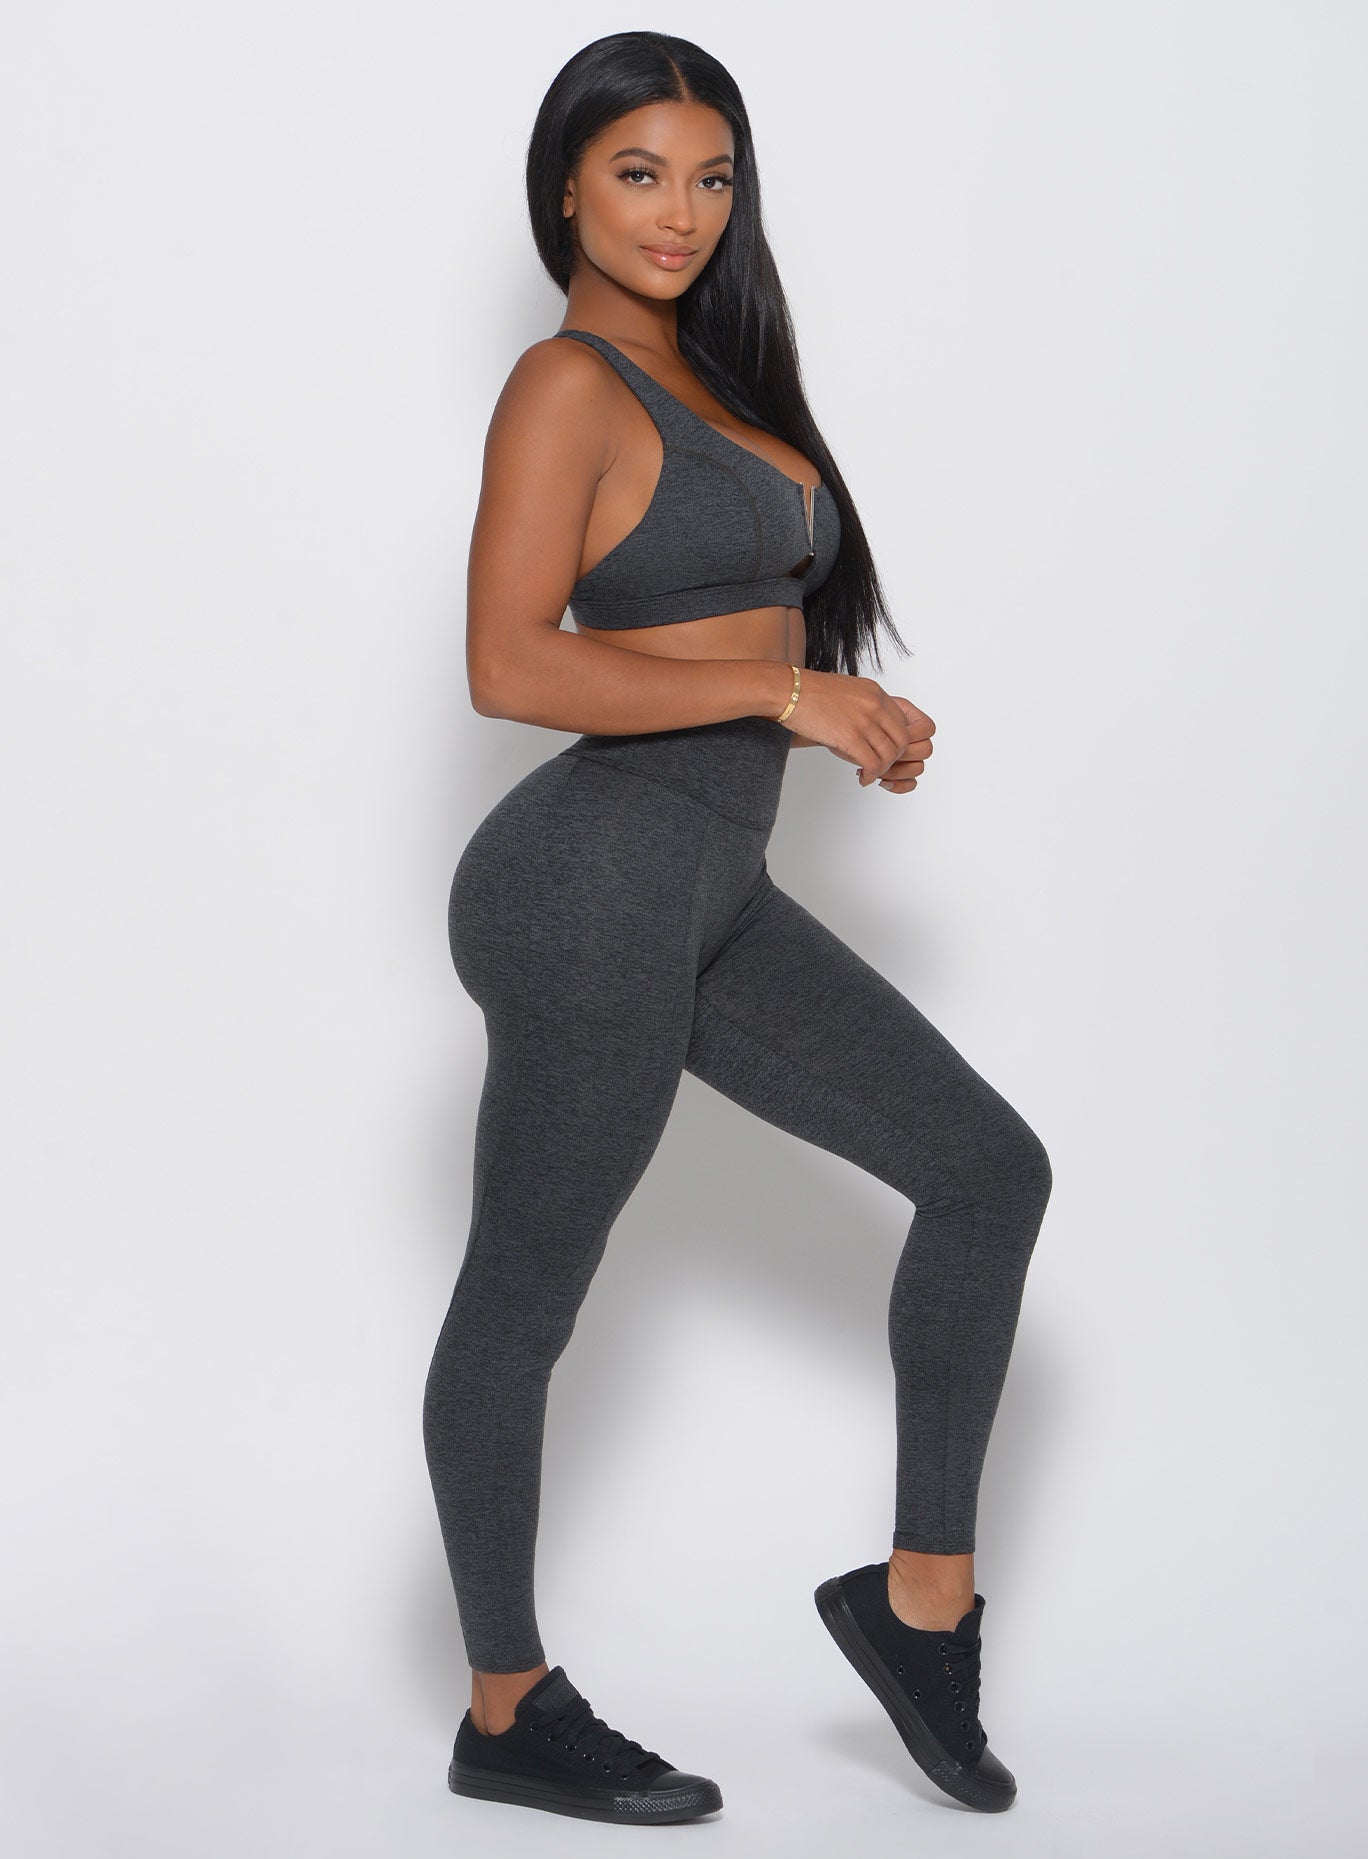 Left side view of the model in a high waist gray leggings with a V back design